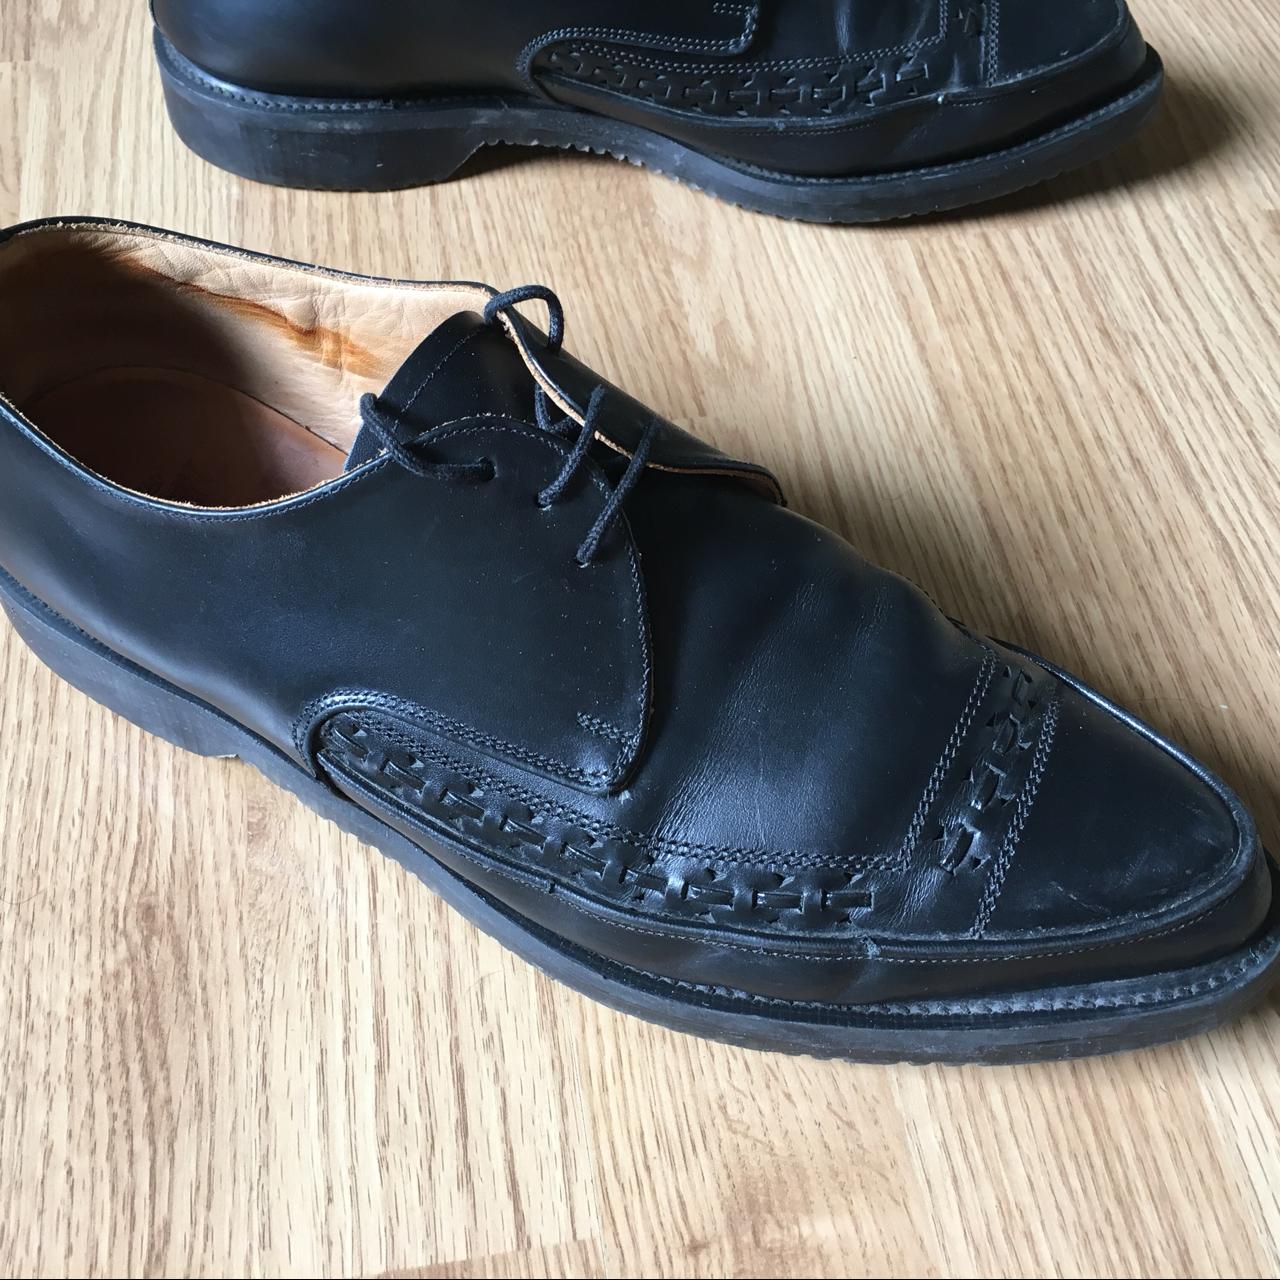 George Cox Mens Shoes, Black Heatseal Gibson, The...